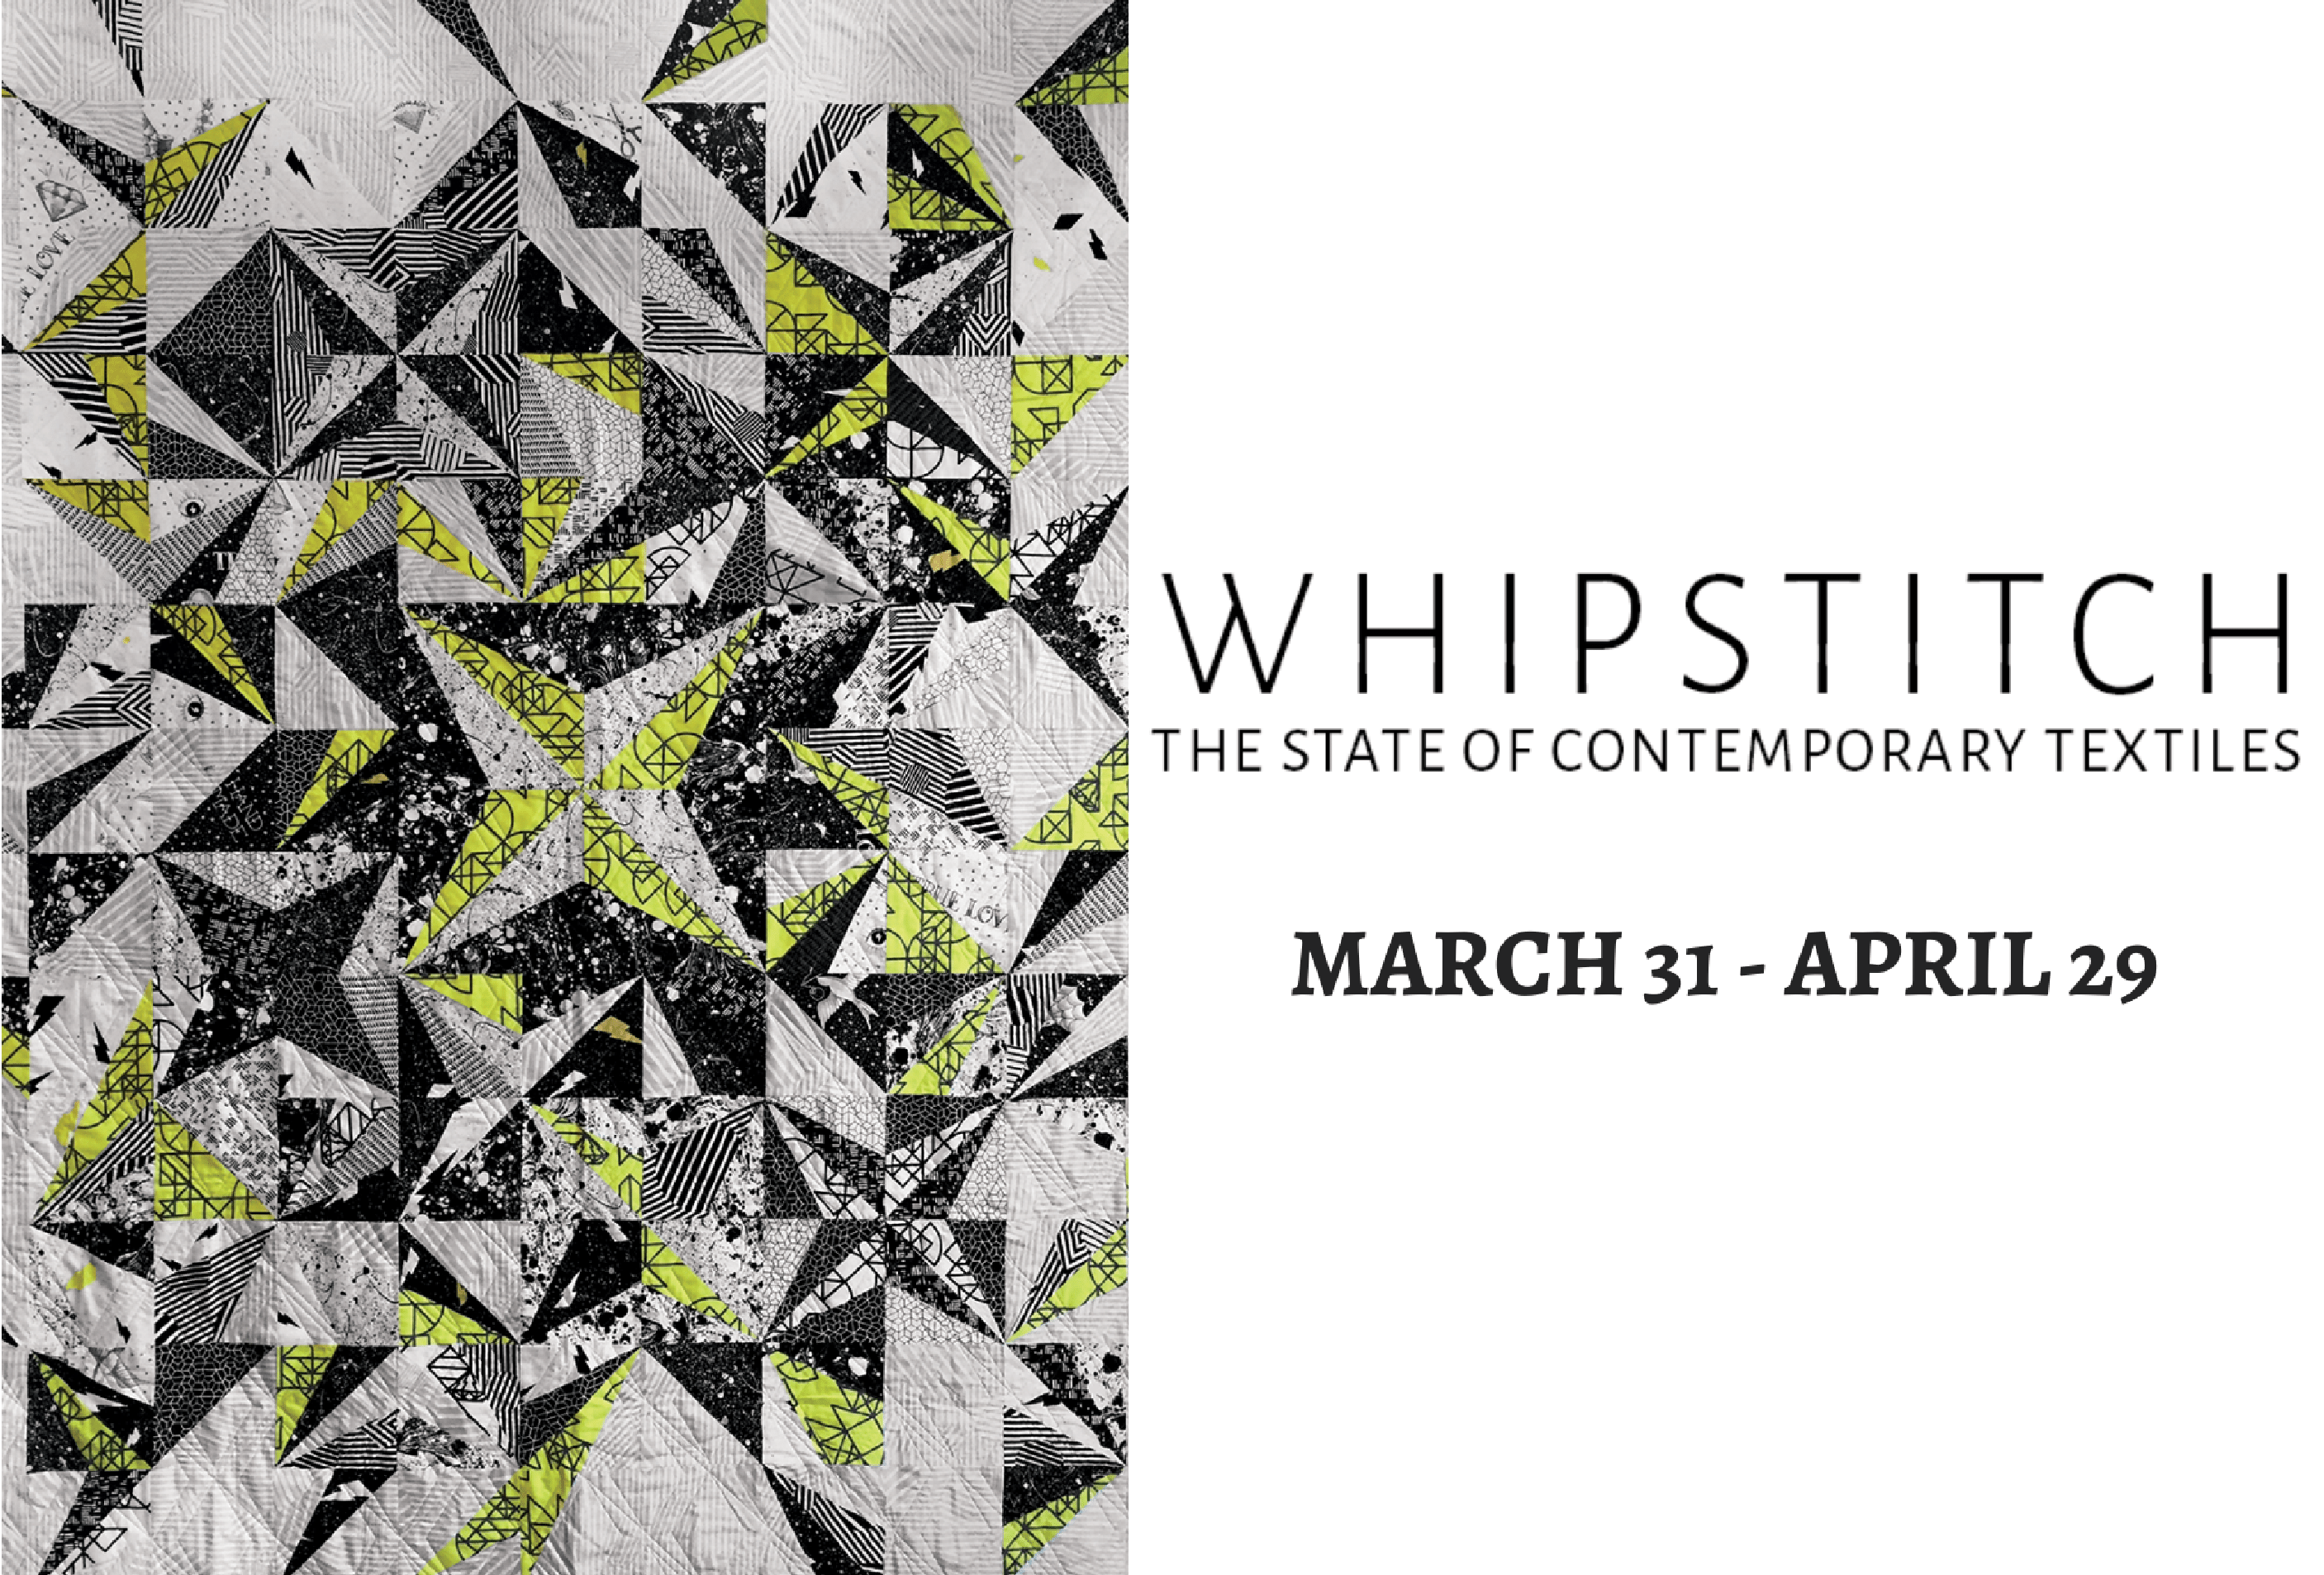 Whipstitch: The State of Contemporary Textiles